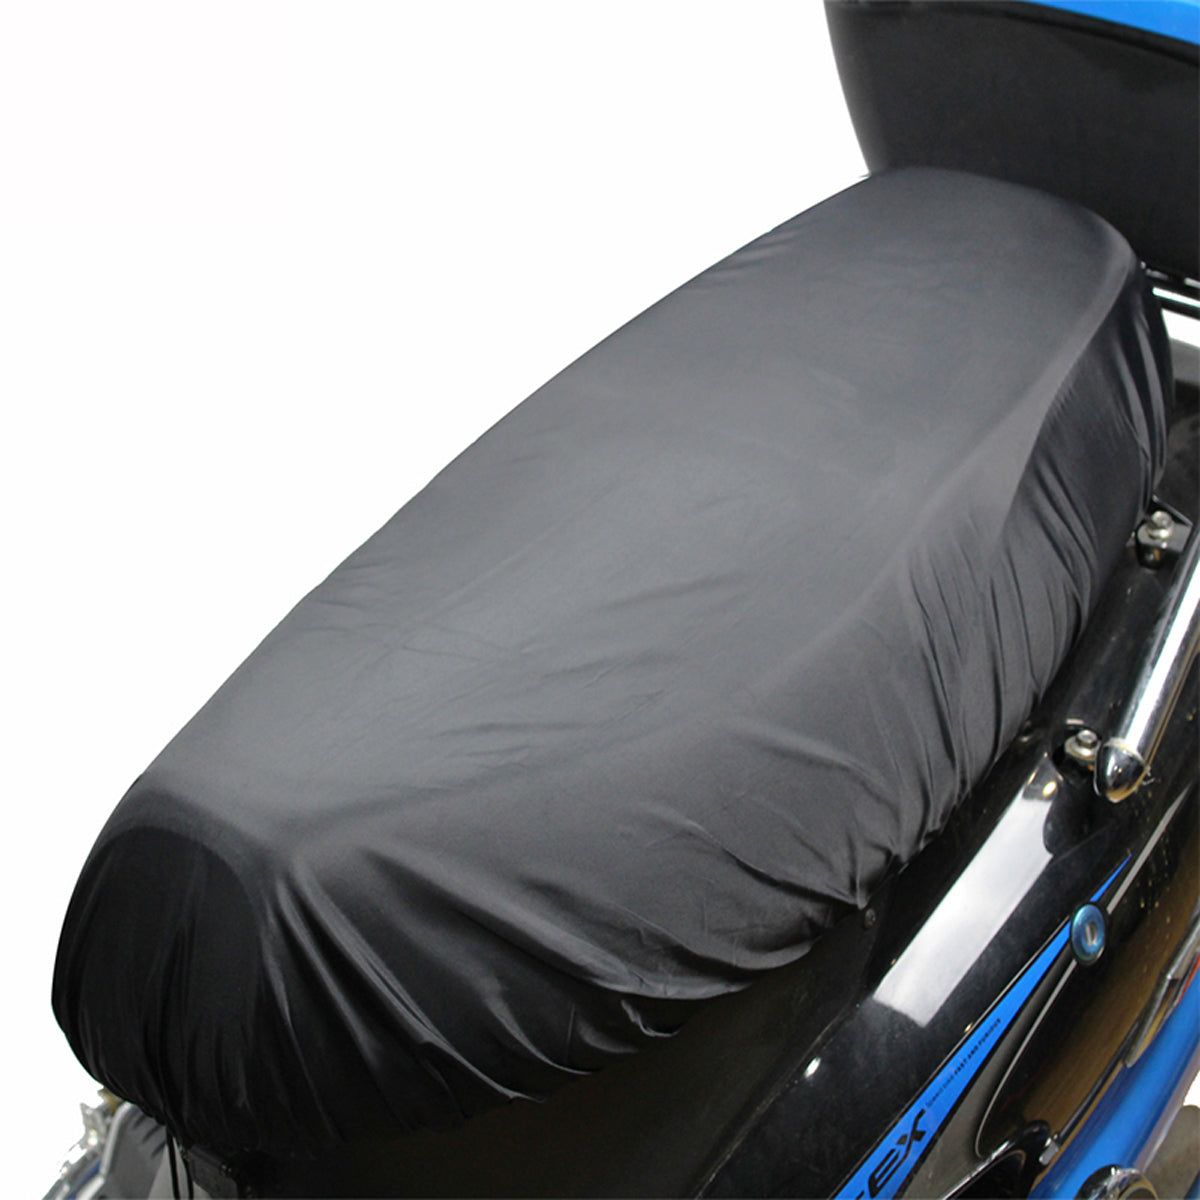 Slate Gray Motorcycle Seat Cover Motorbike Scooter Waterproof Cushion Protector Cushion